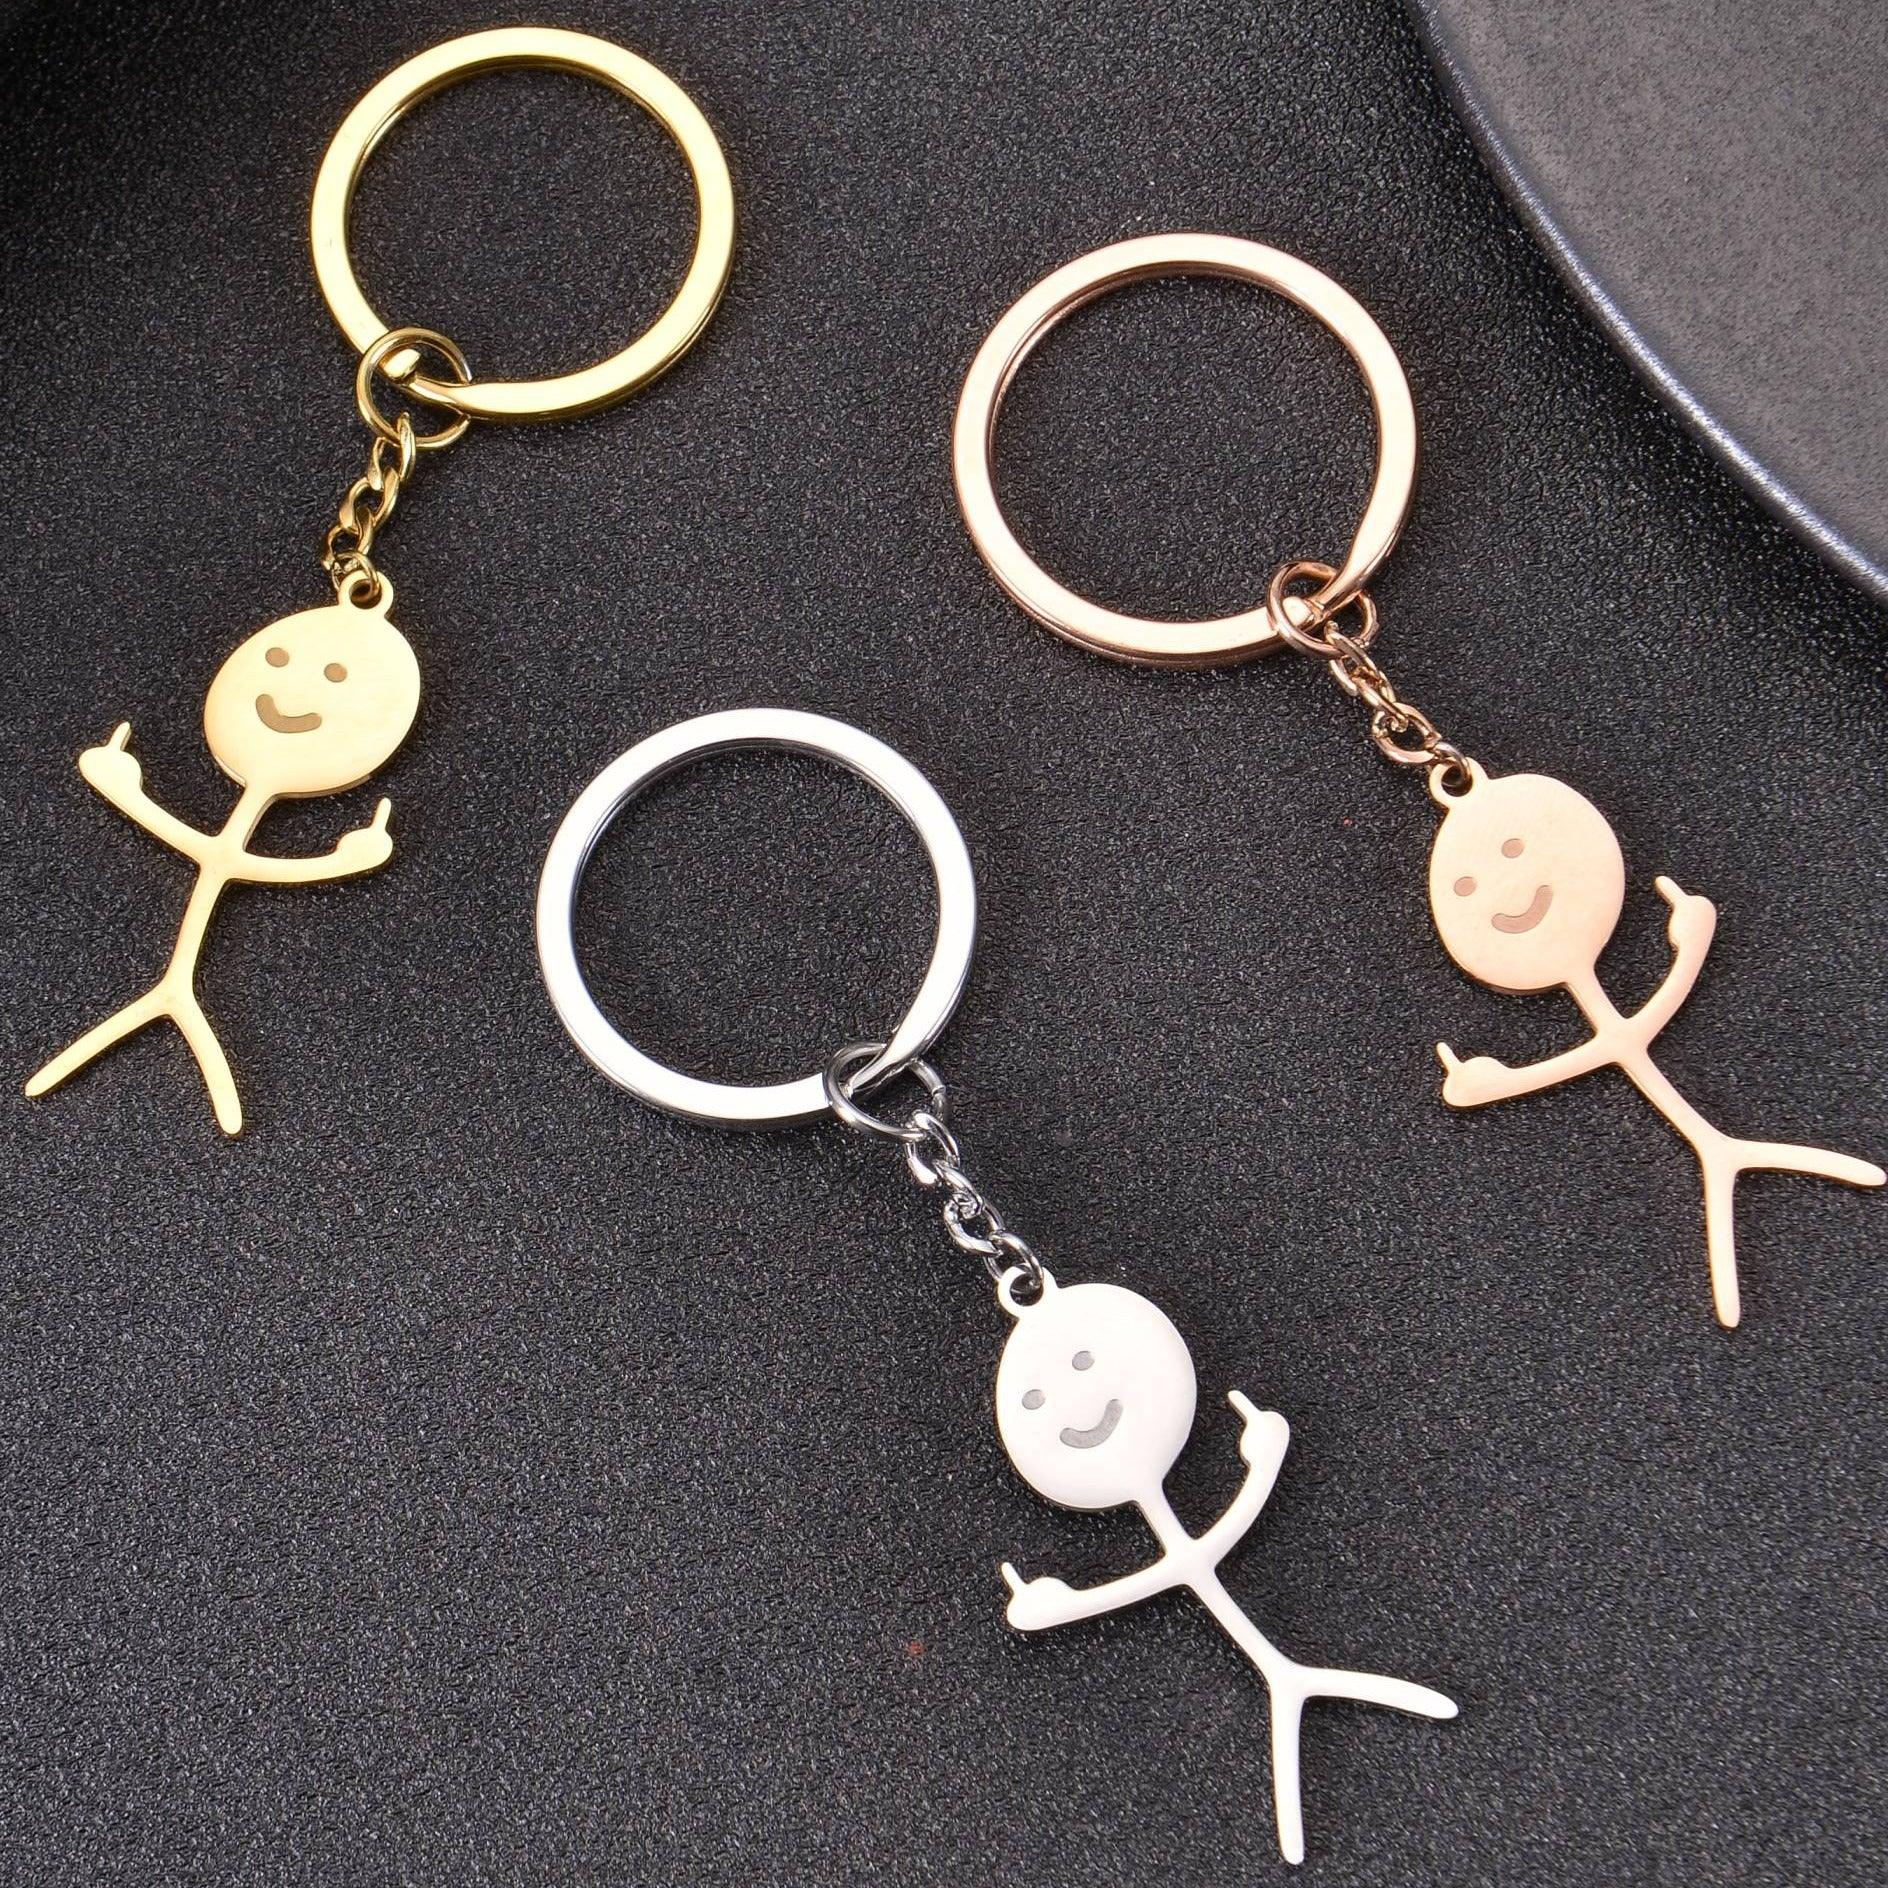  VTER Funny Middle Finger Stick-man Cat Dog Frog Ghost keychain  for funny keychain gifts (Cat, gold) : Clothing, Shoes & Jewelry